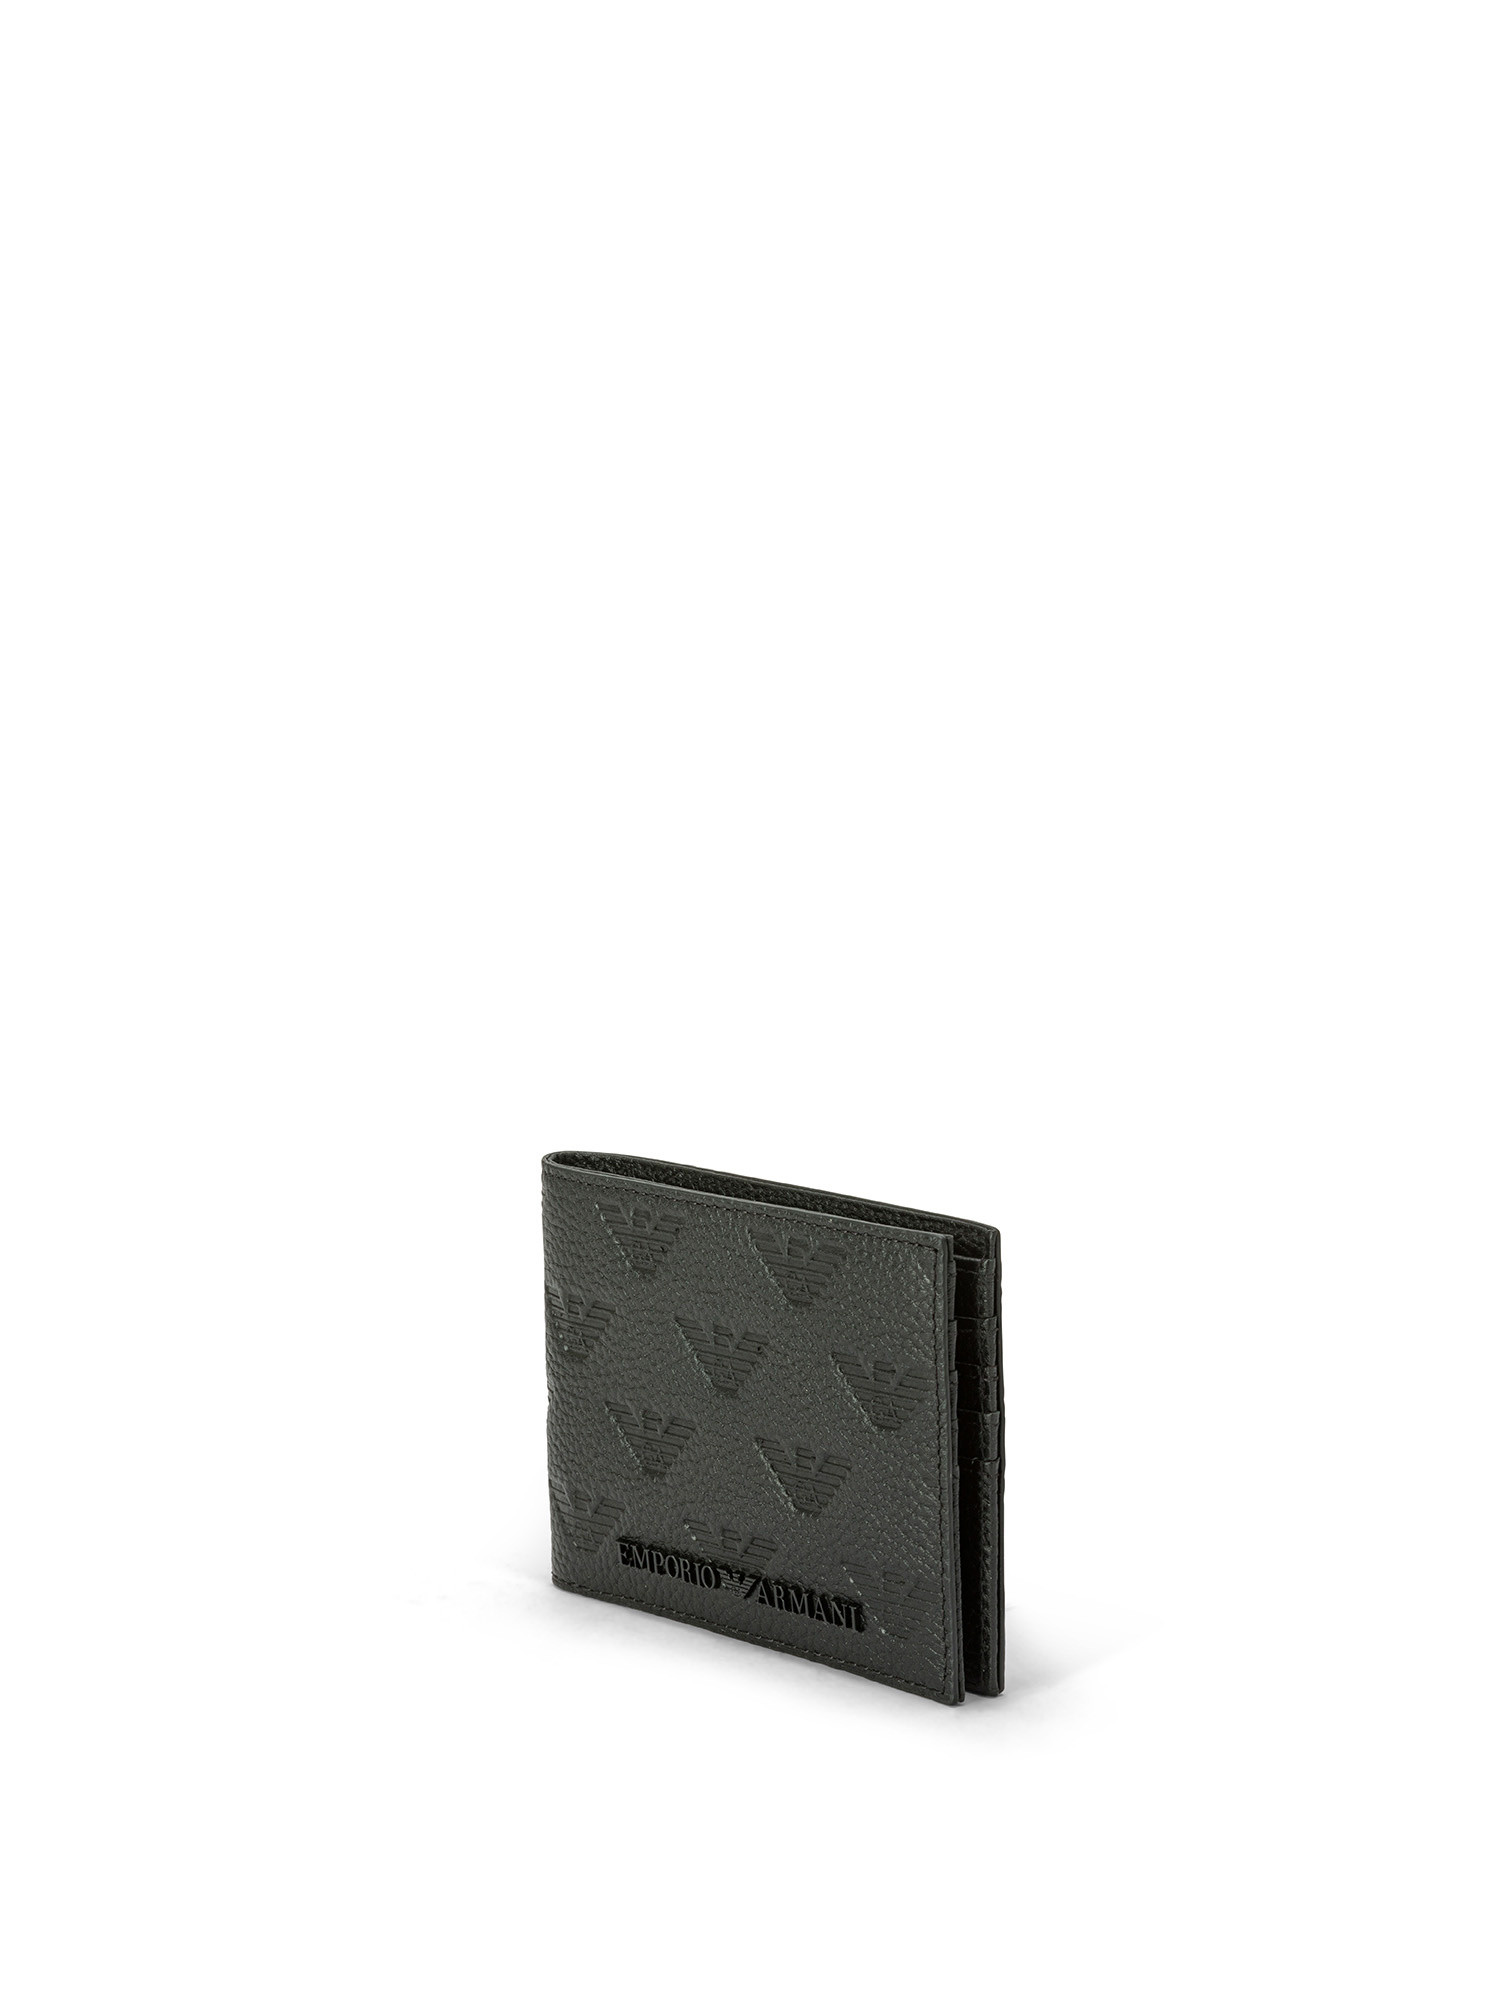 Emporio Armani - Leather wallet with all-over eagle logo, Black, large image number 1